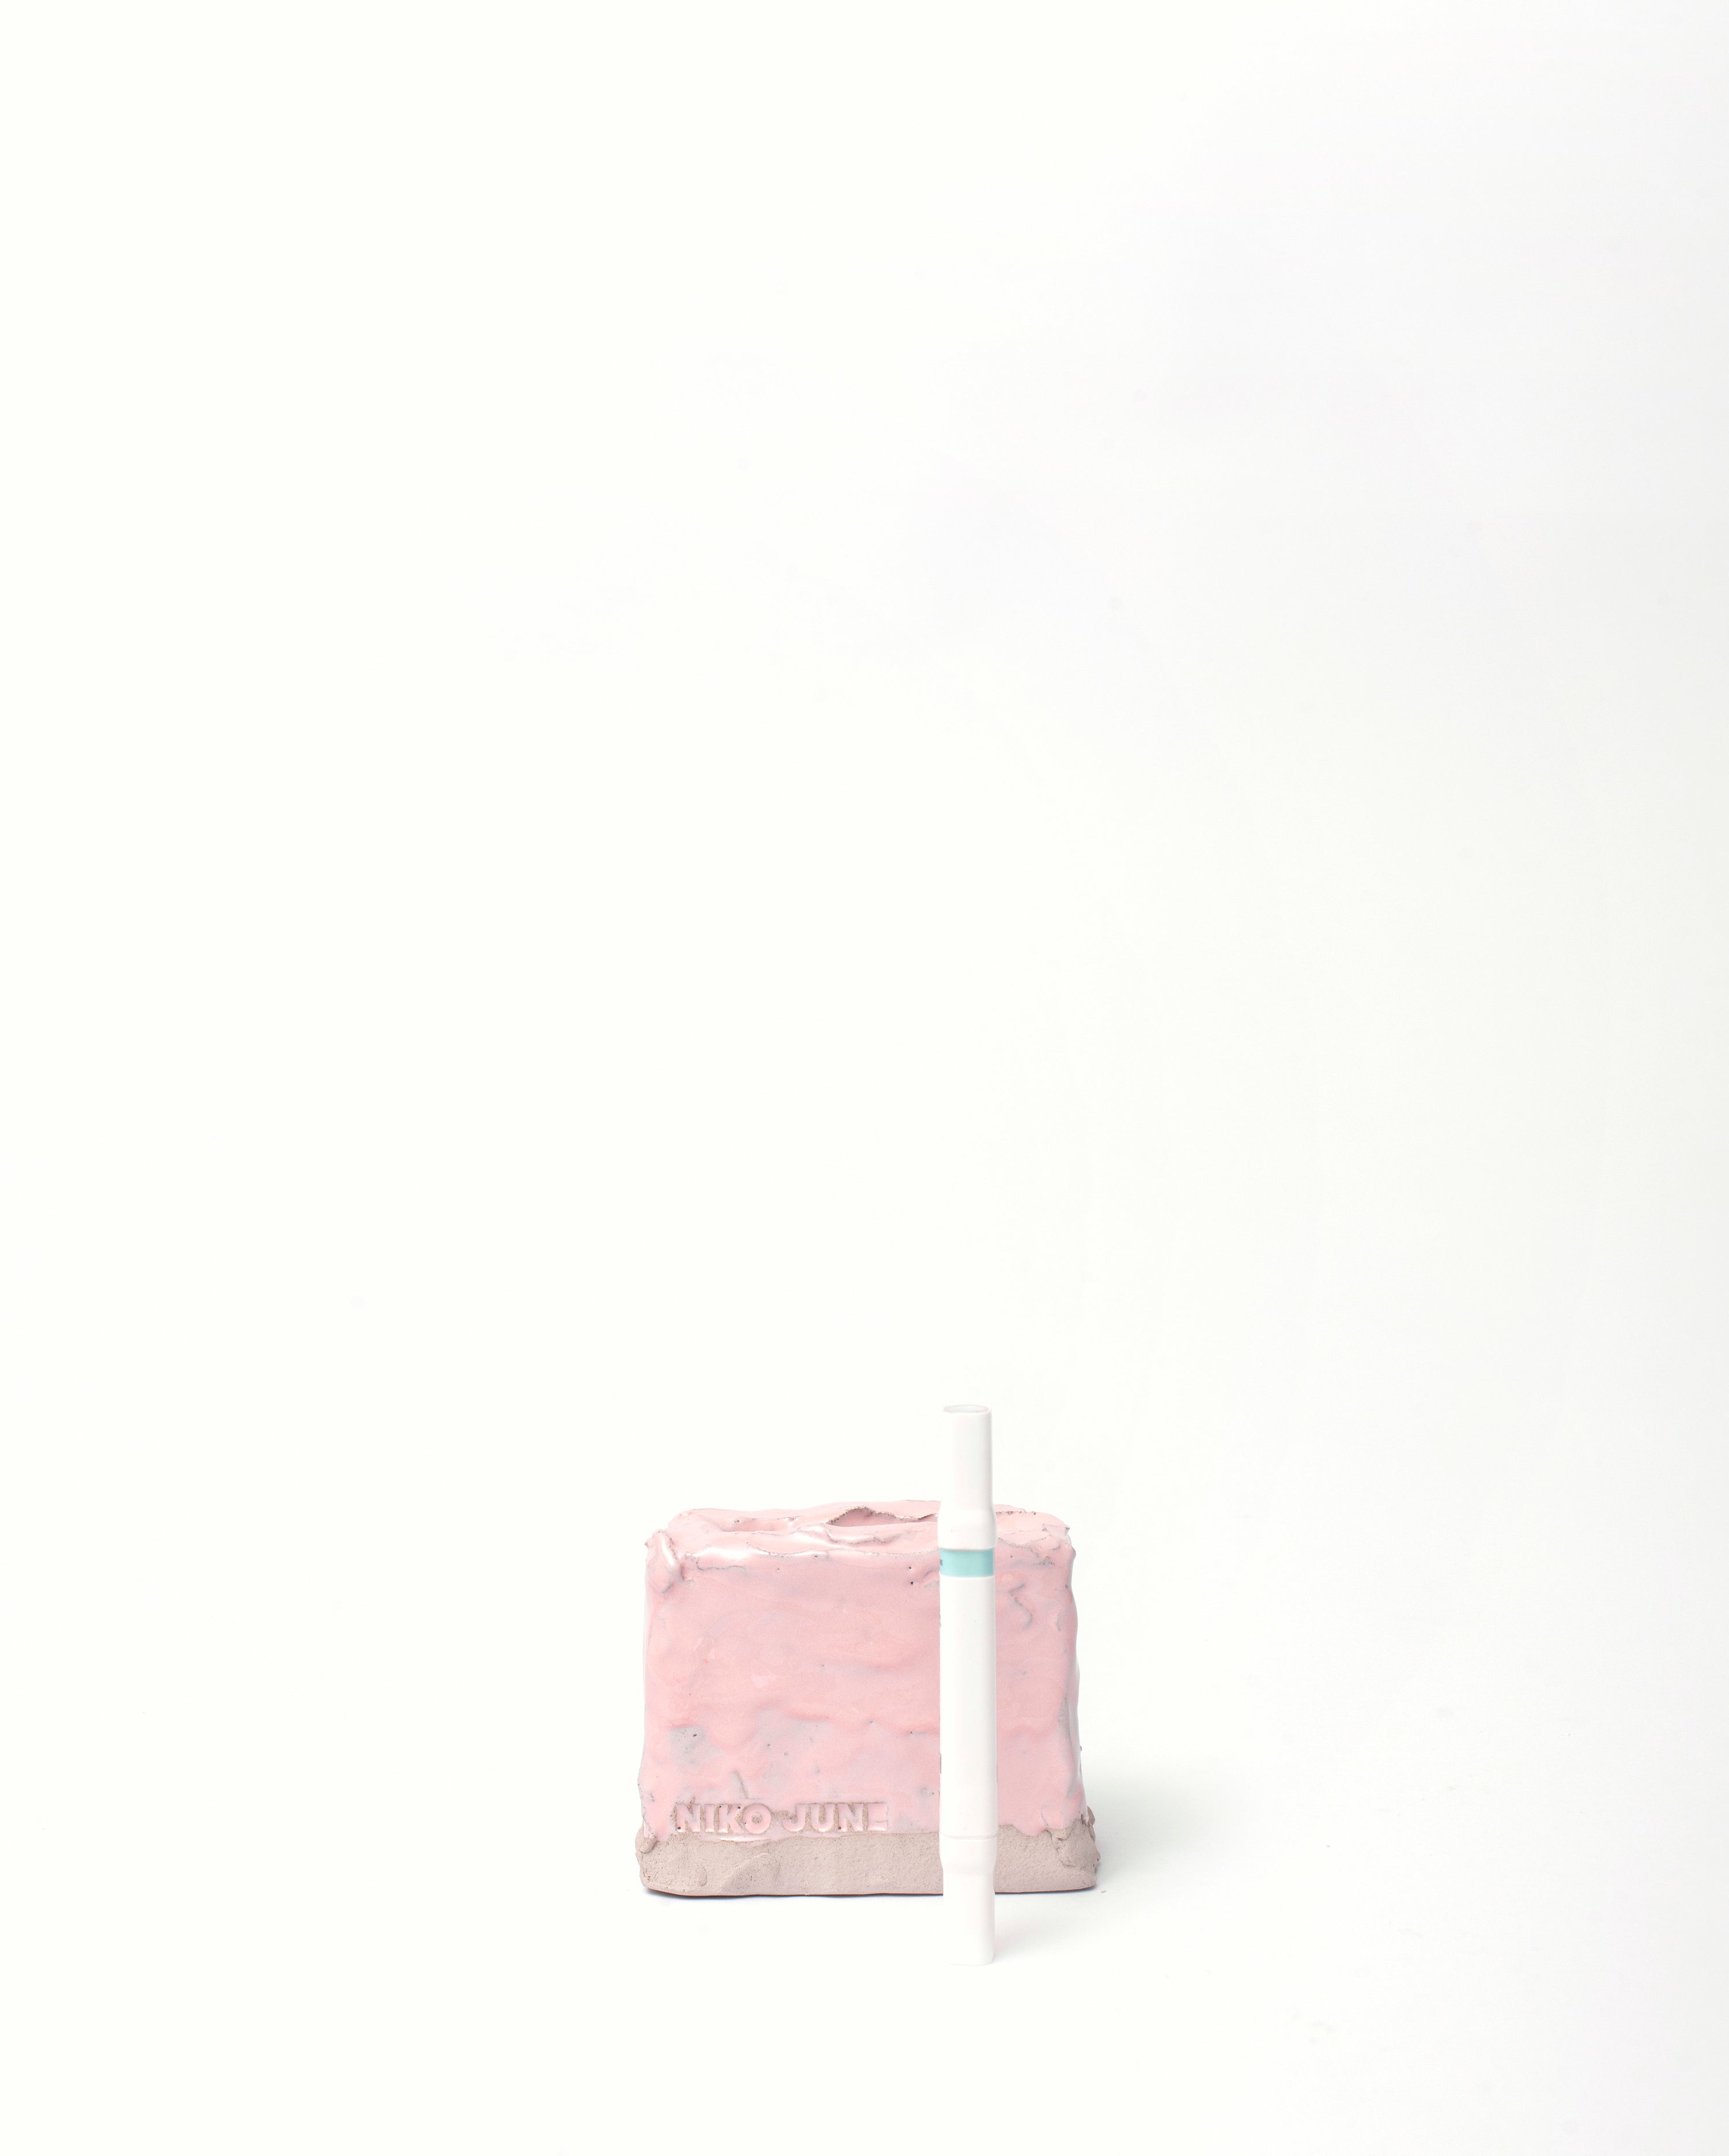 Handmade ceramic organizer object in pink glaze with a white pen facing front in white background